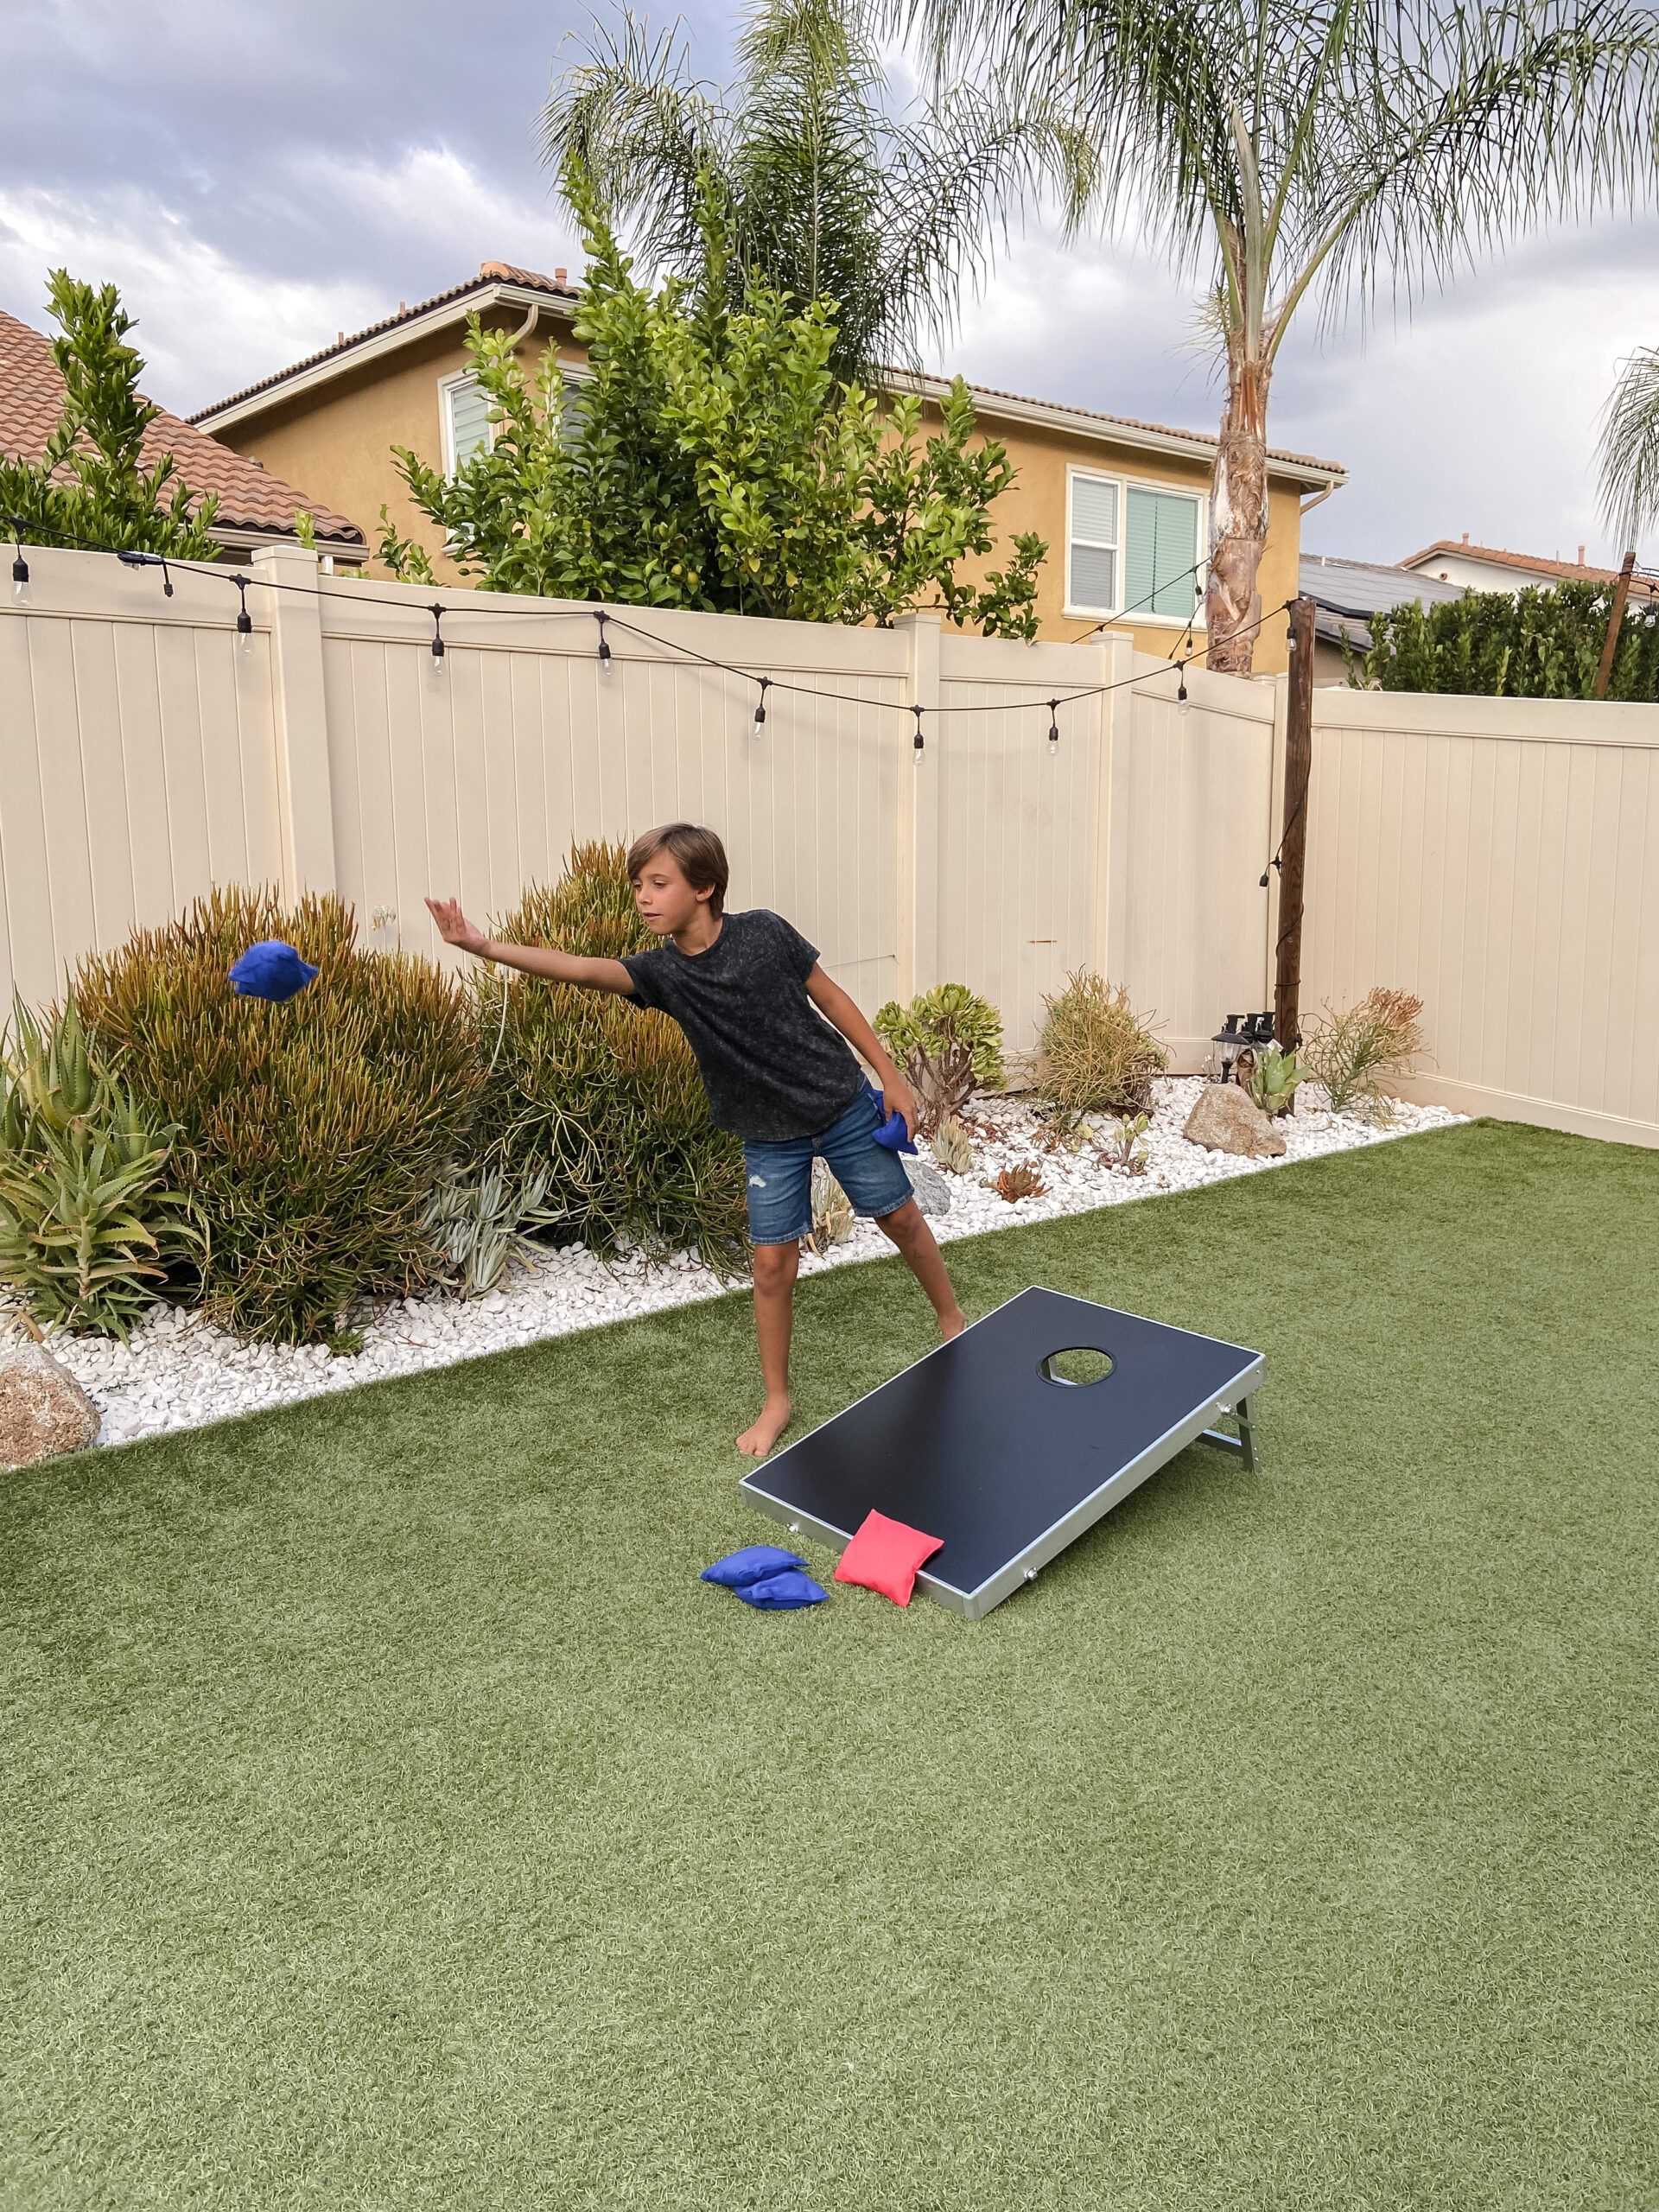 Outdoor Summer Fun with Walmart-Jaclyn De Leon style. Fun outdoor activities at a great price from Walmart. We love spending time as a family and playing outdoor games together. The games we got are Jenga, Corn hole, Ladderball and ring toss.